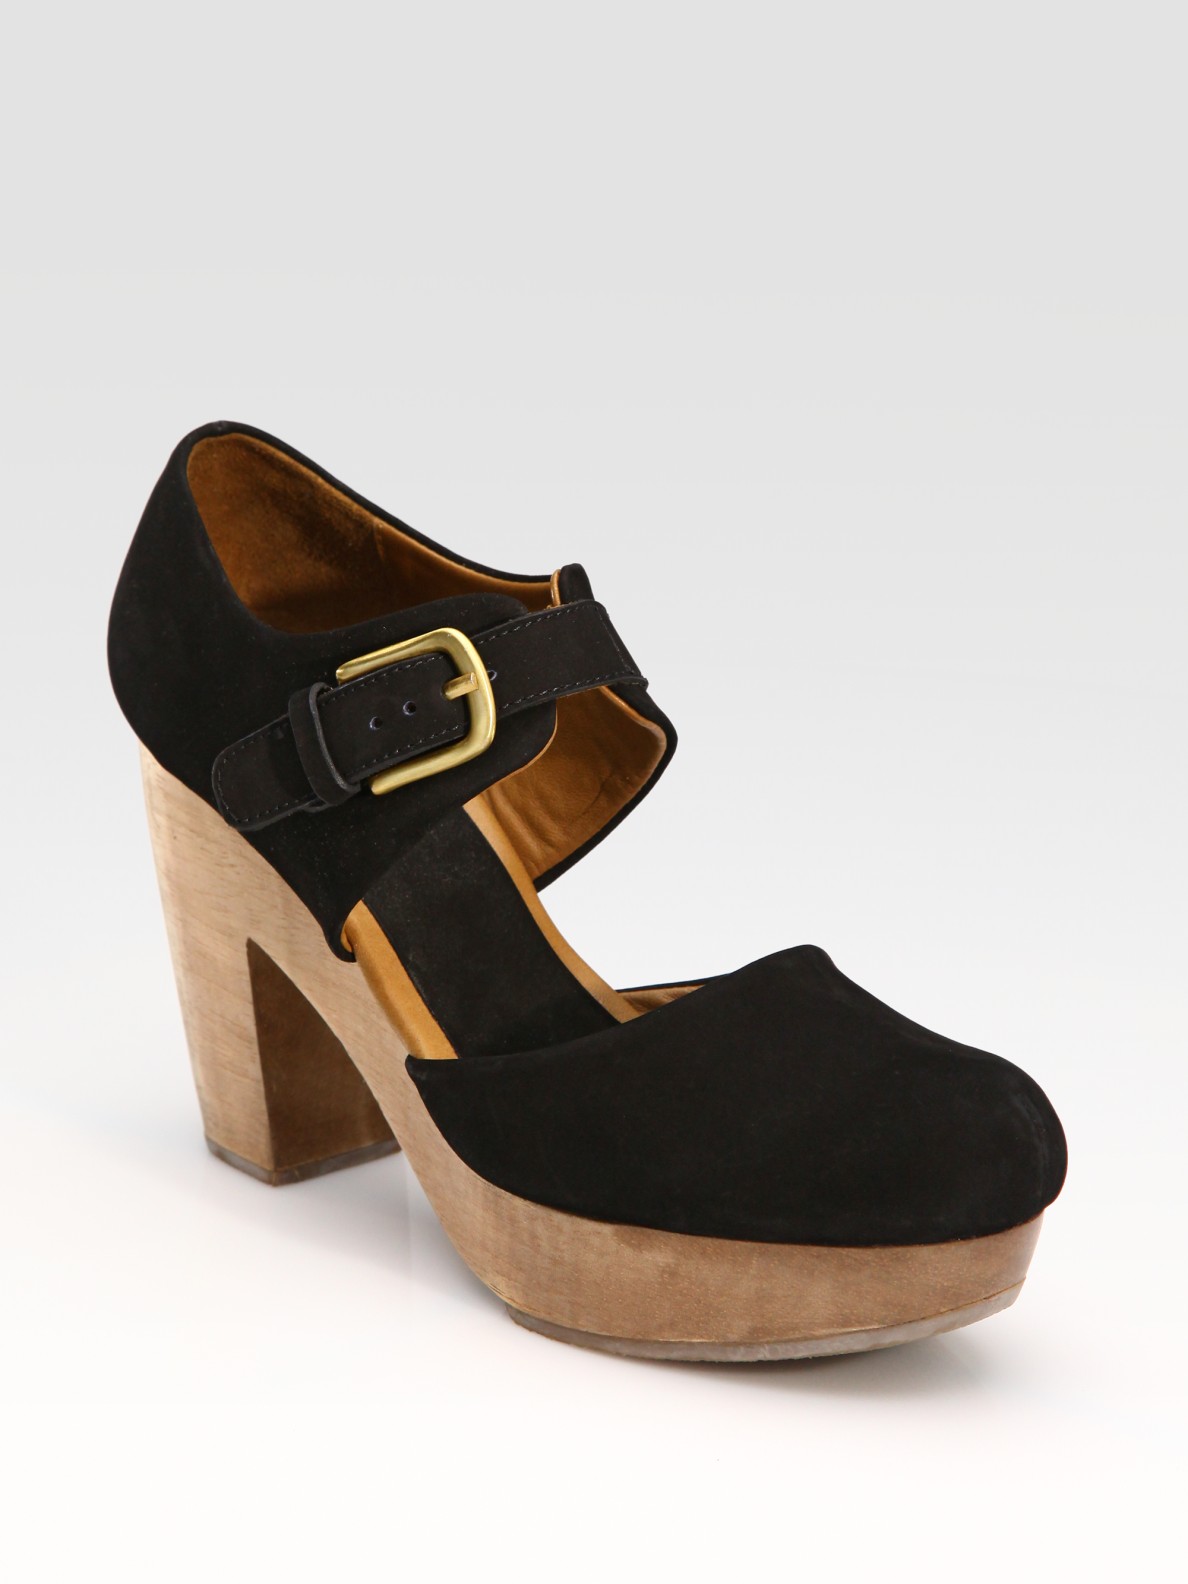 Rachel Comey Carver Suede Mary Jane Sandals in Black | Lyst